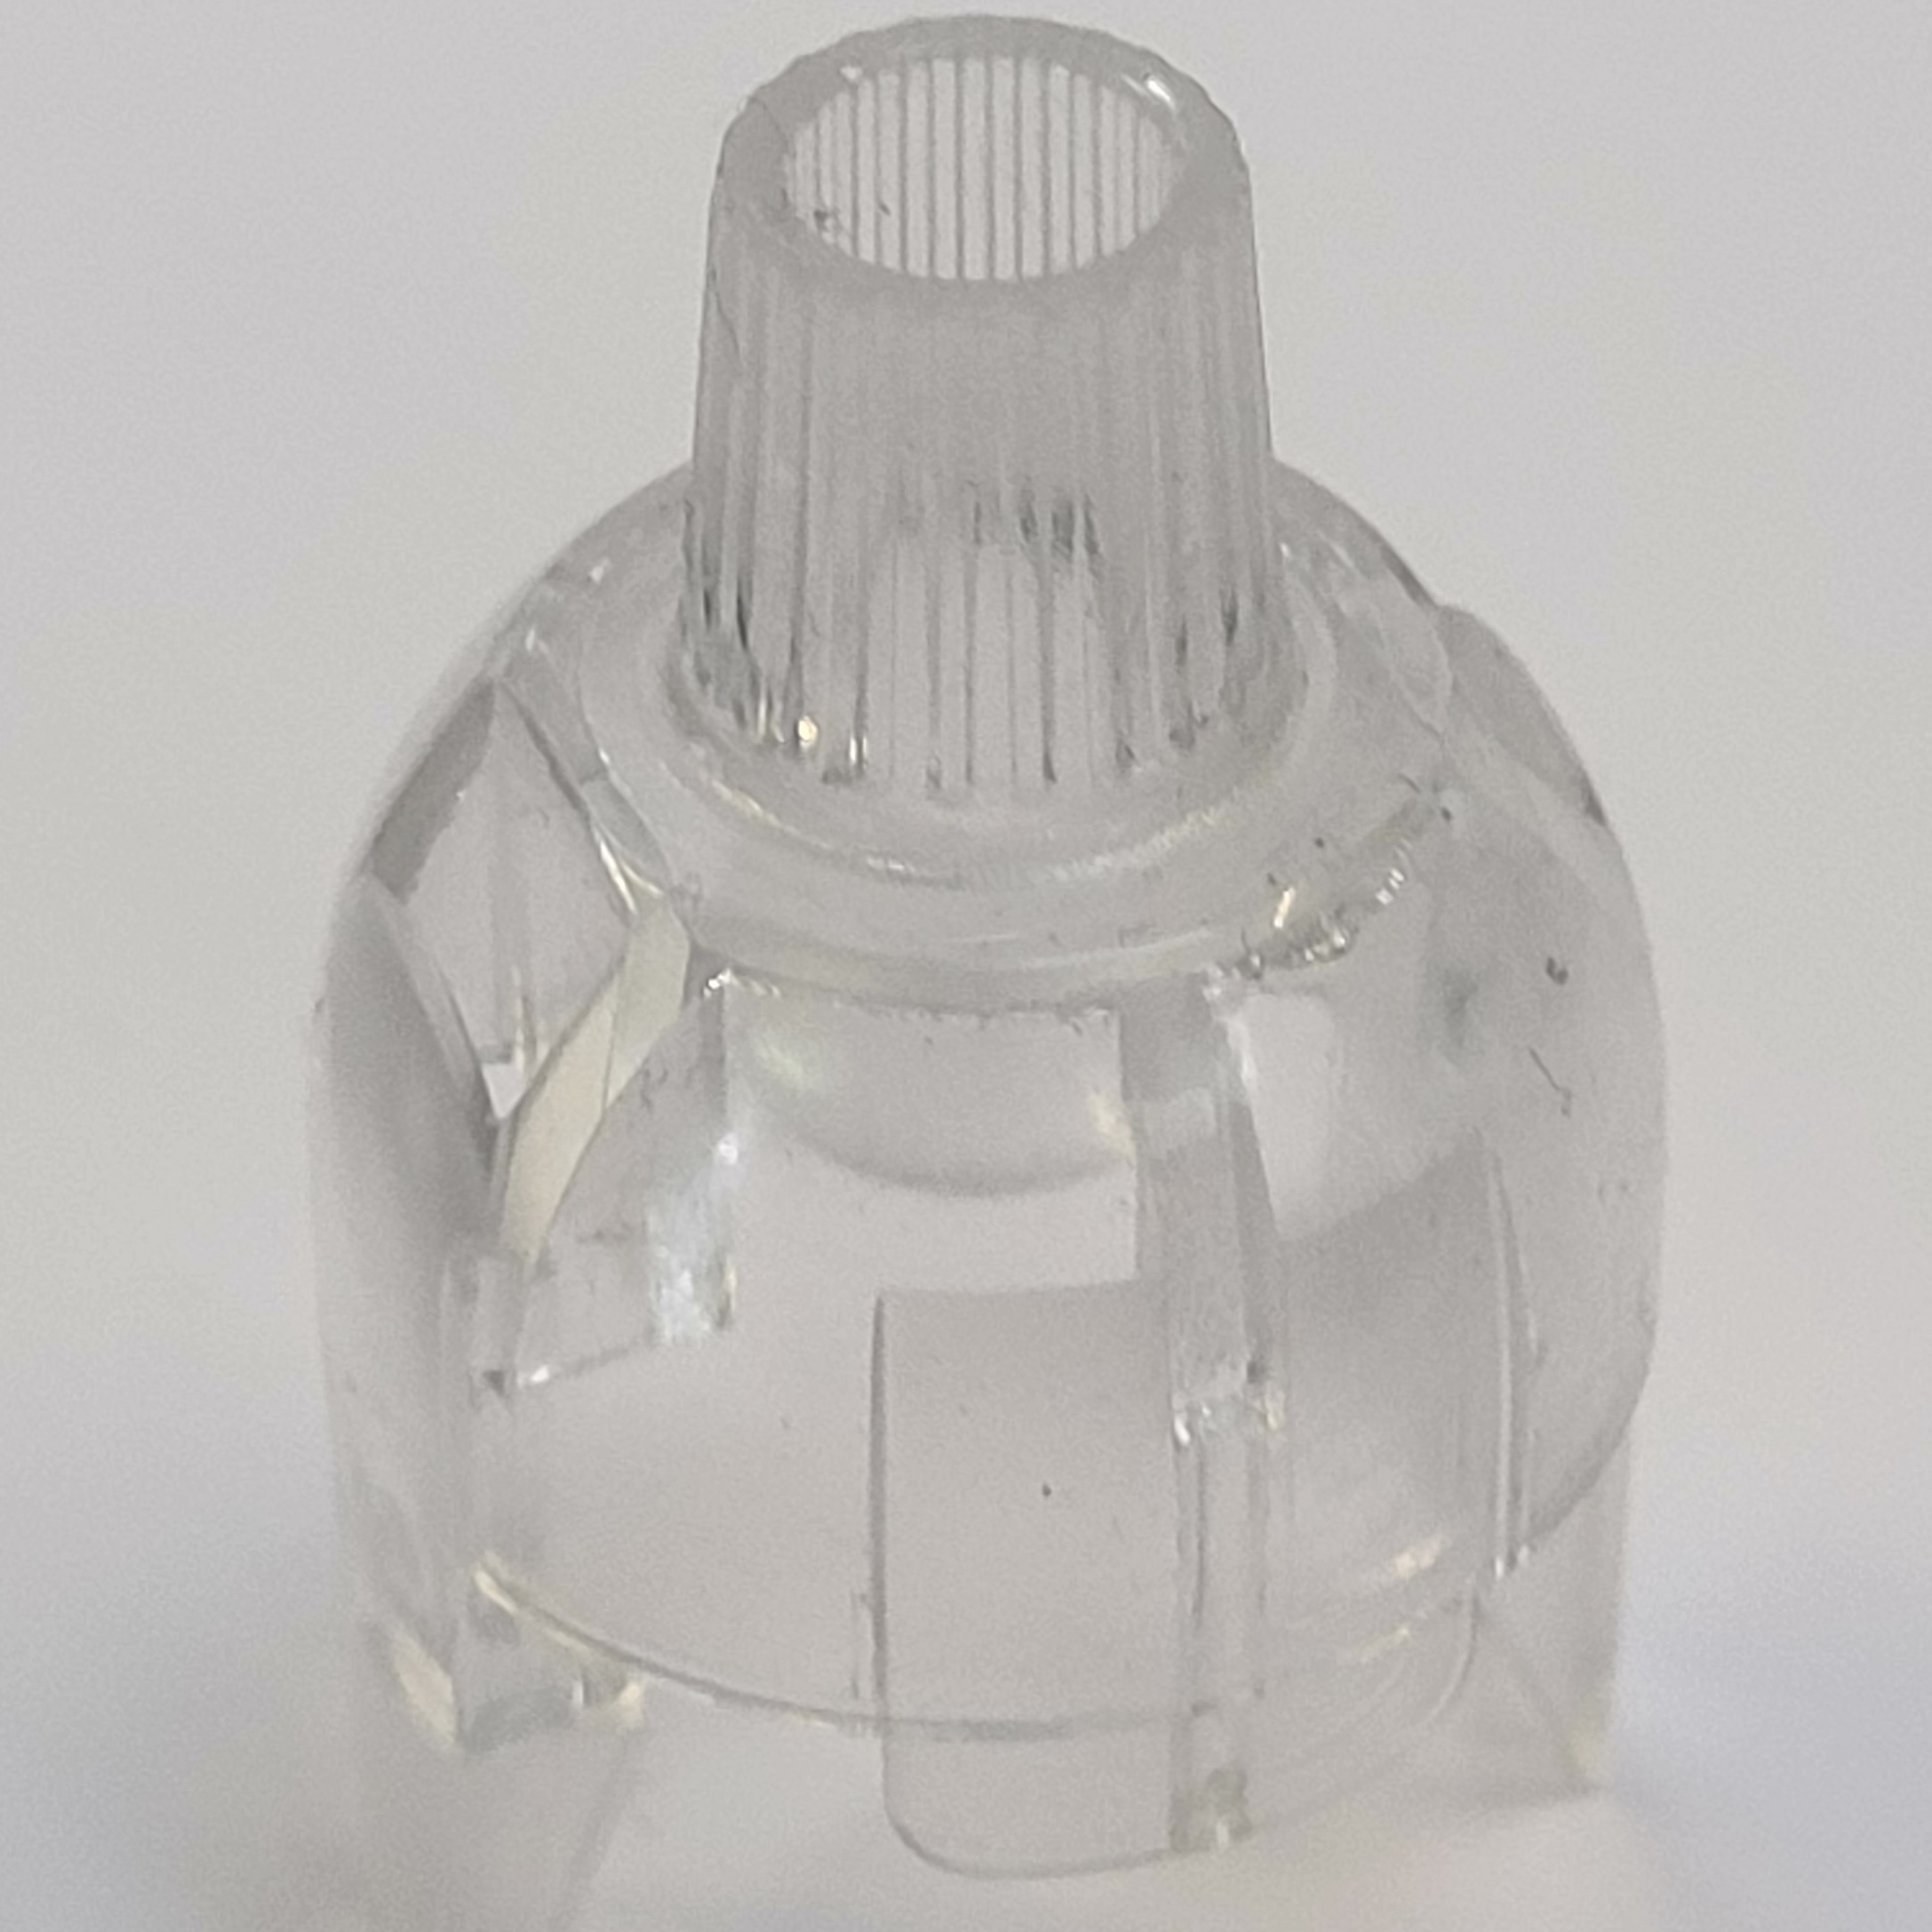 10MM PLASTIC ENTRY SNAP FIT DOME WITH CORDGRIP CLEAR FOR E14/E12 THERMOPLASTIC LAMPHOLDER (USE WITH 983 ISOLATOR CORDGRIP)